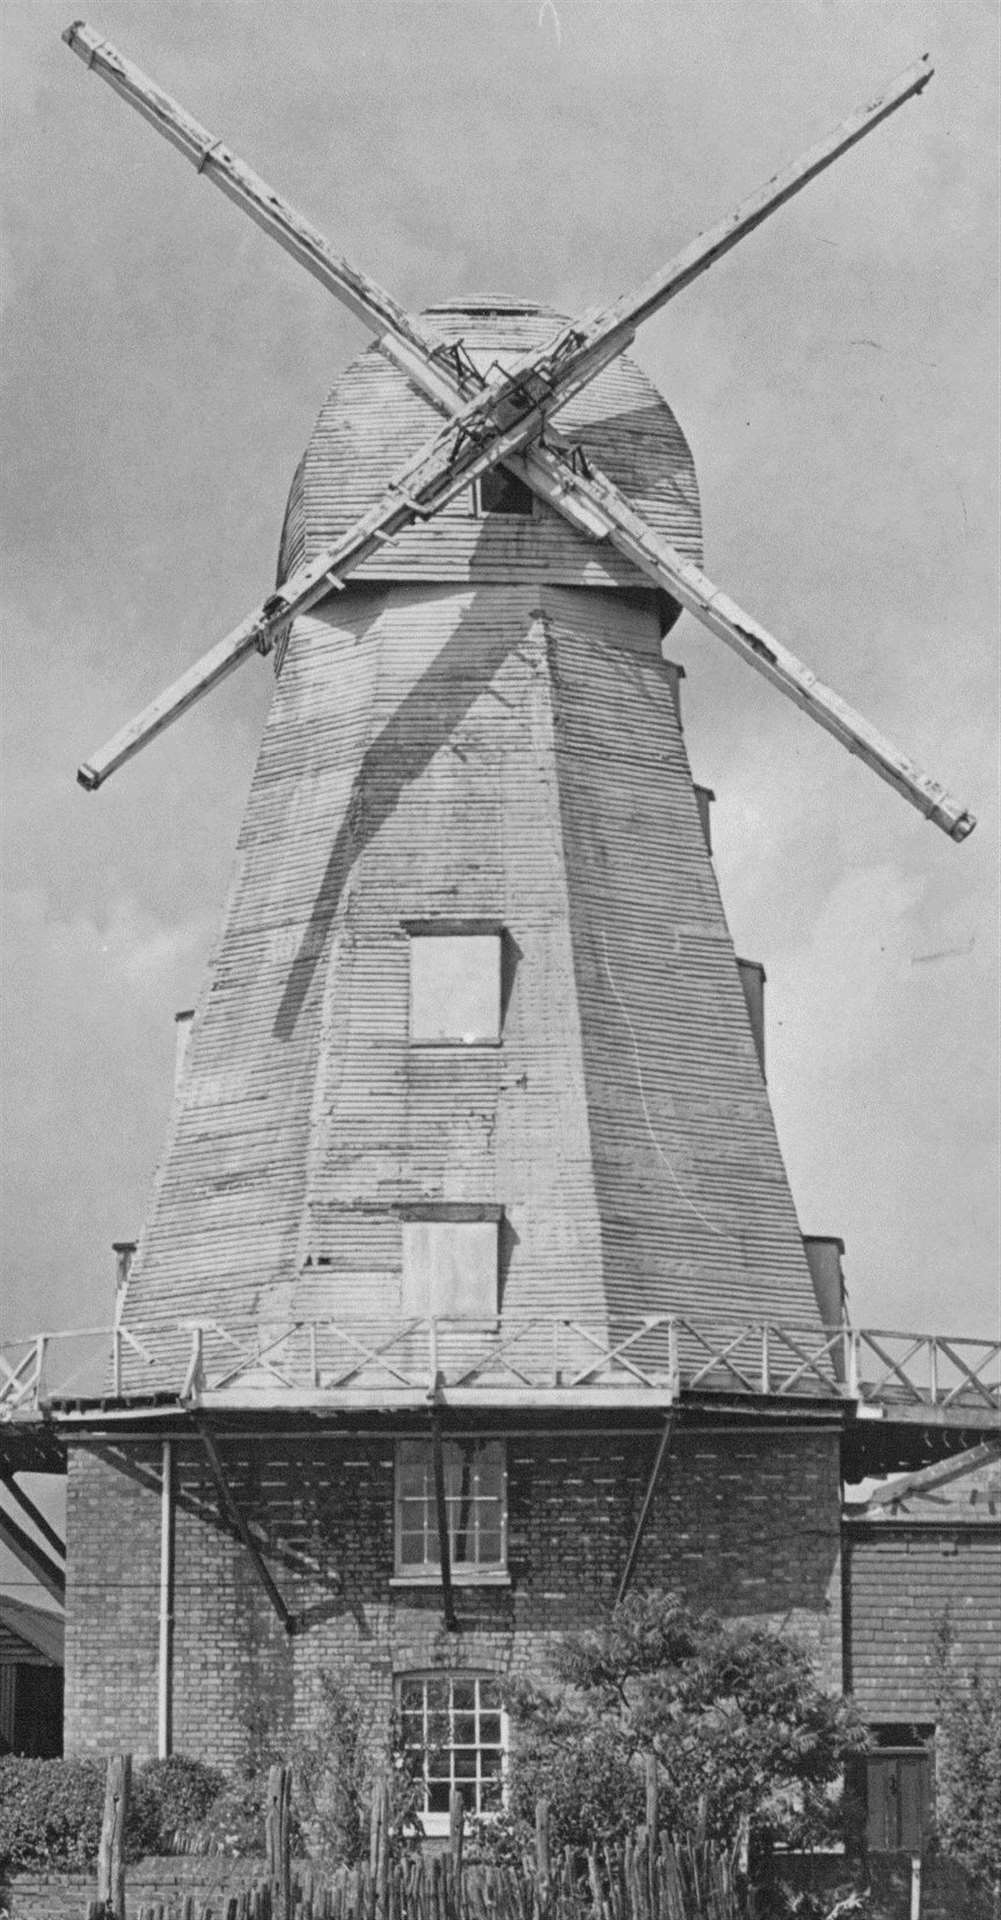 A sad and derelict Willesborough Windmill pictured in 1968. Copyright: Steve Salter